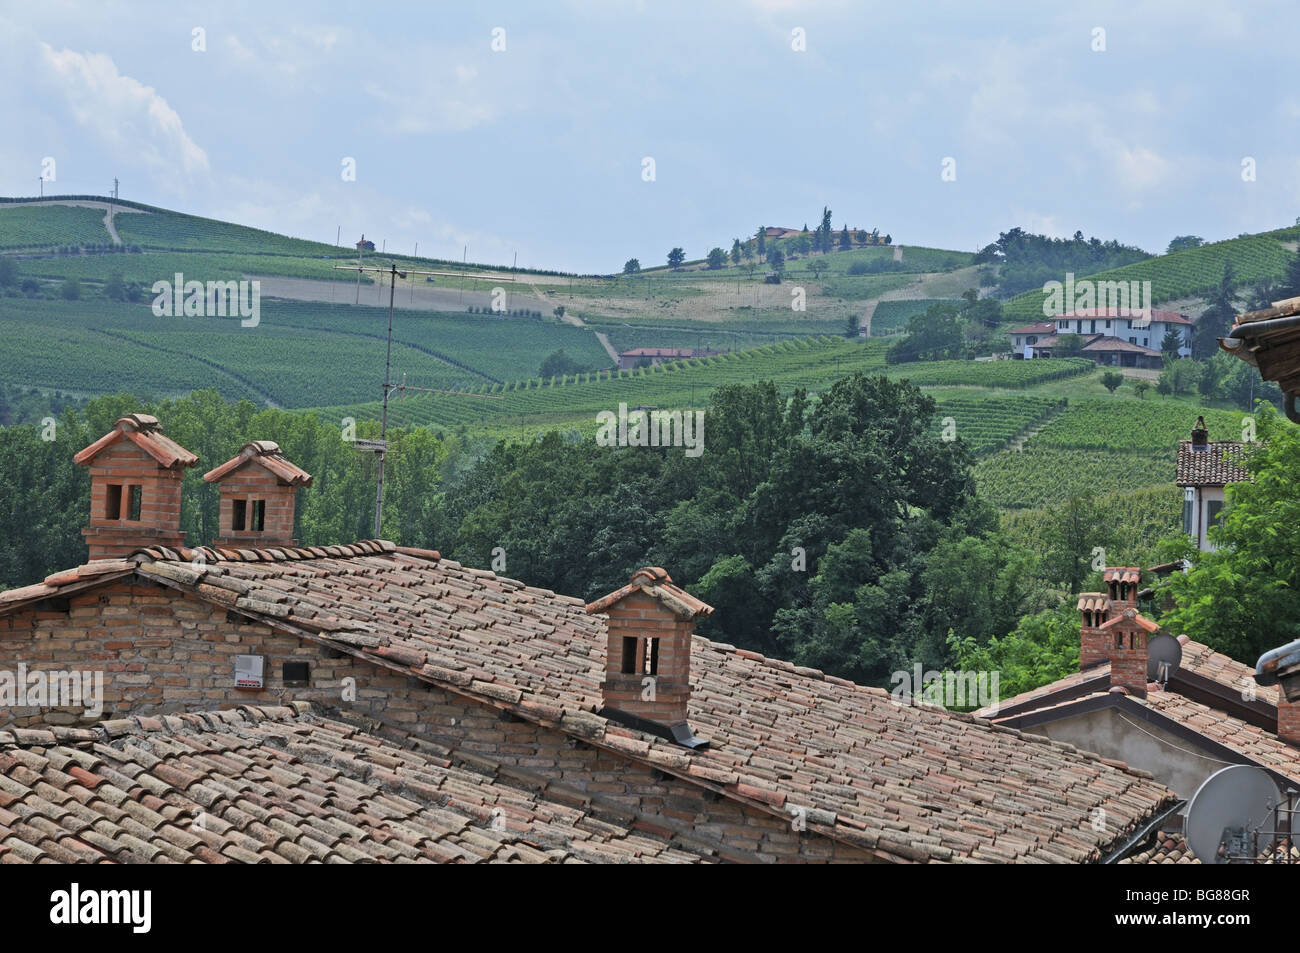 Clay tiled roofs and views of the vineyards around Barolo castle Langhe Piedmont Italy Stock Photo